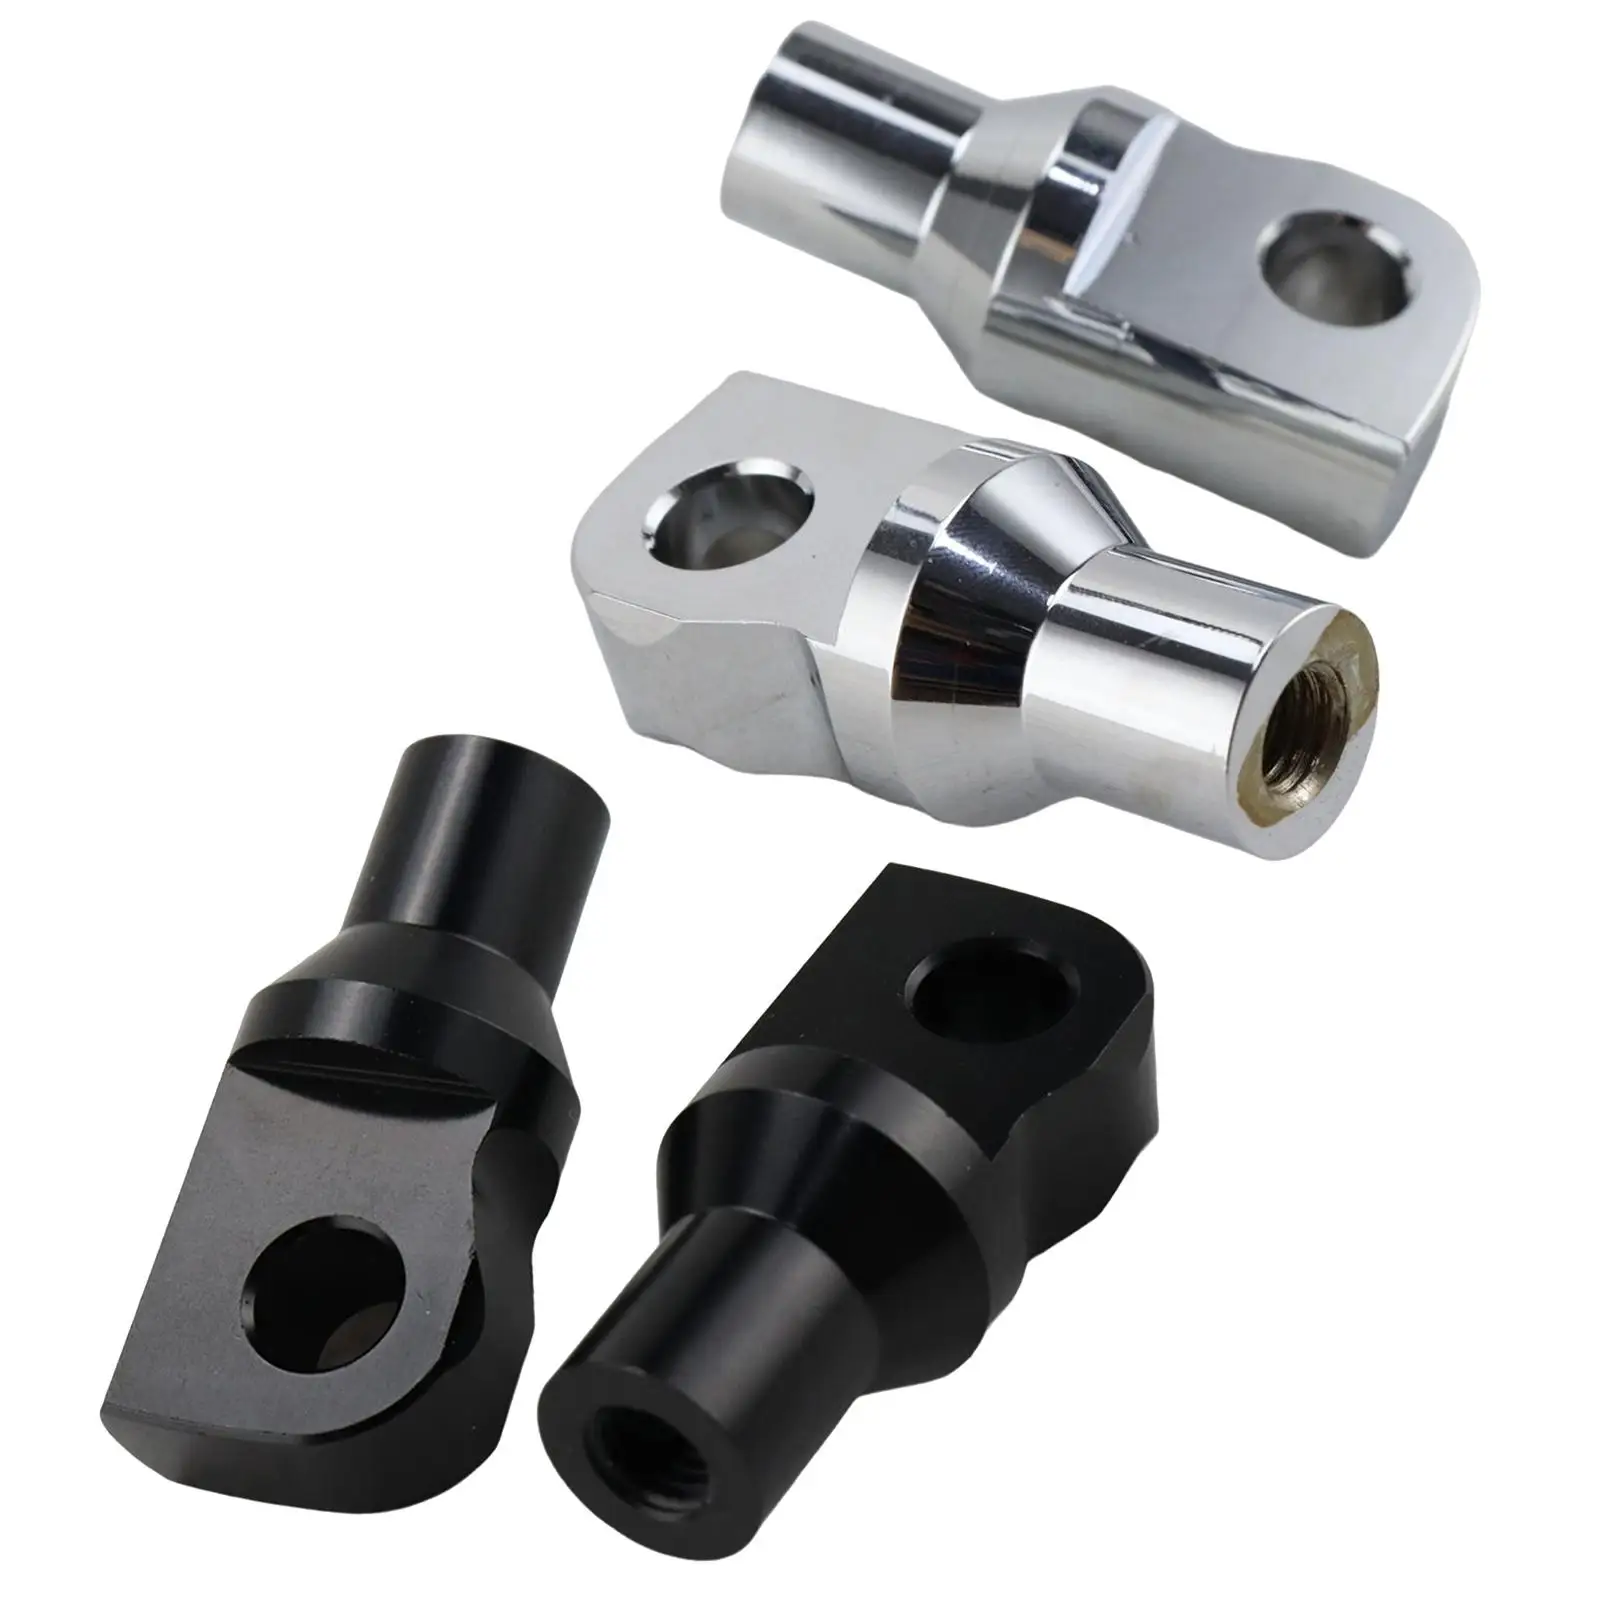 2 Pieces Motorcycle Footpeg Mounting Bolt Adapter for Heritage Fxdwg Male Pegs Mounting